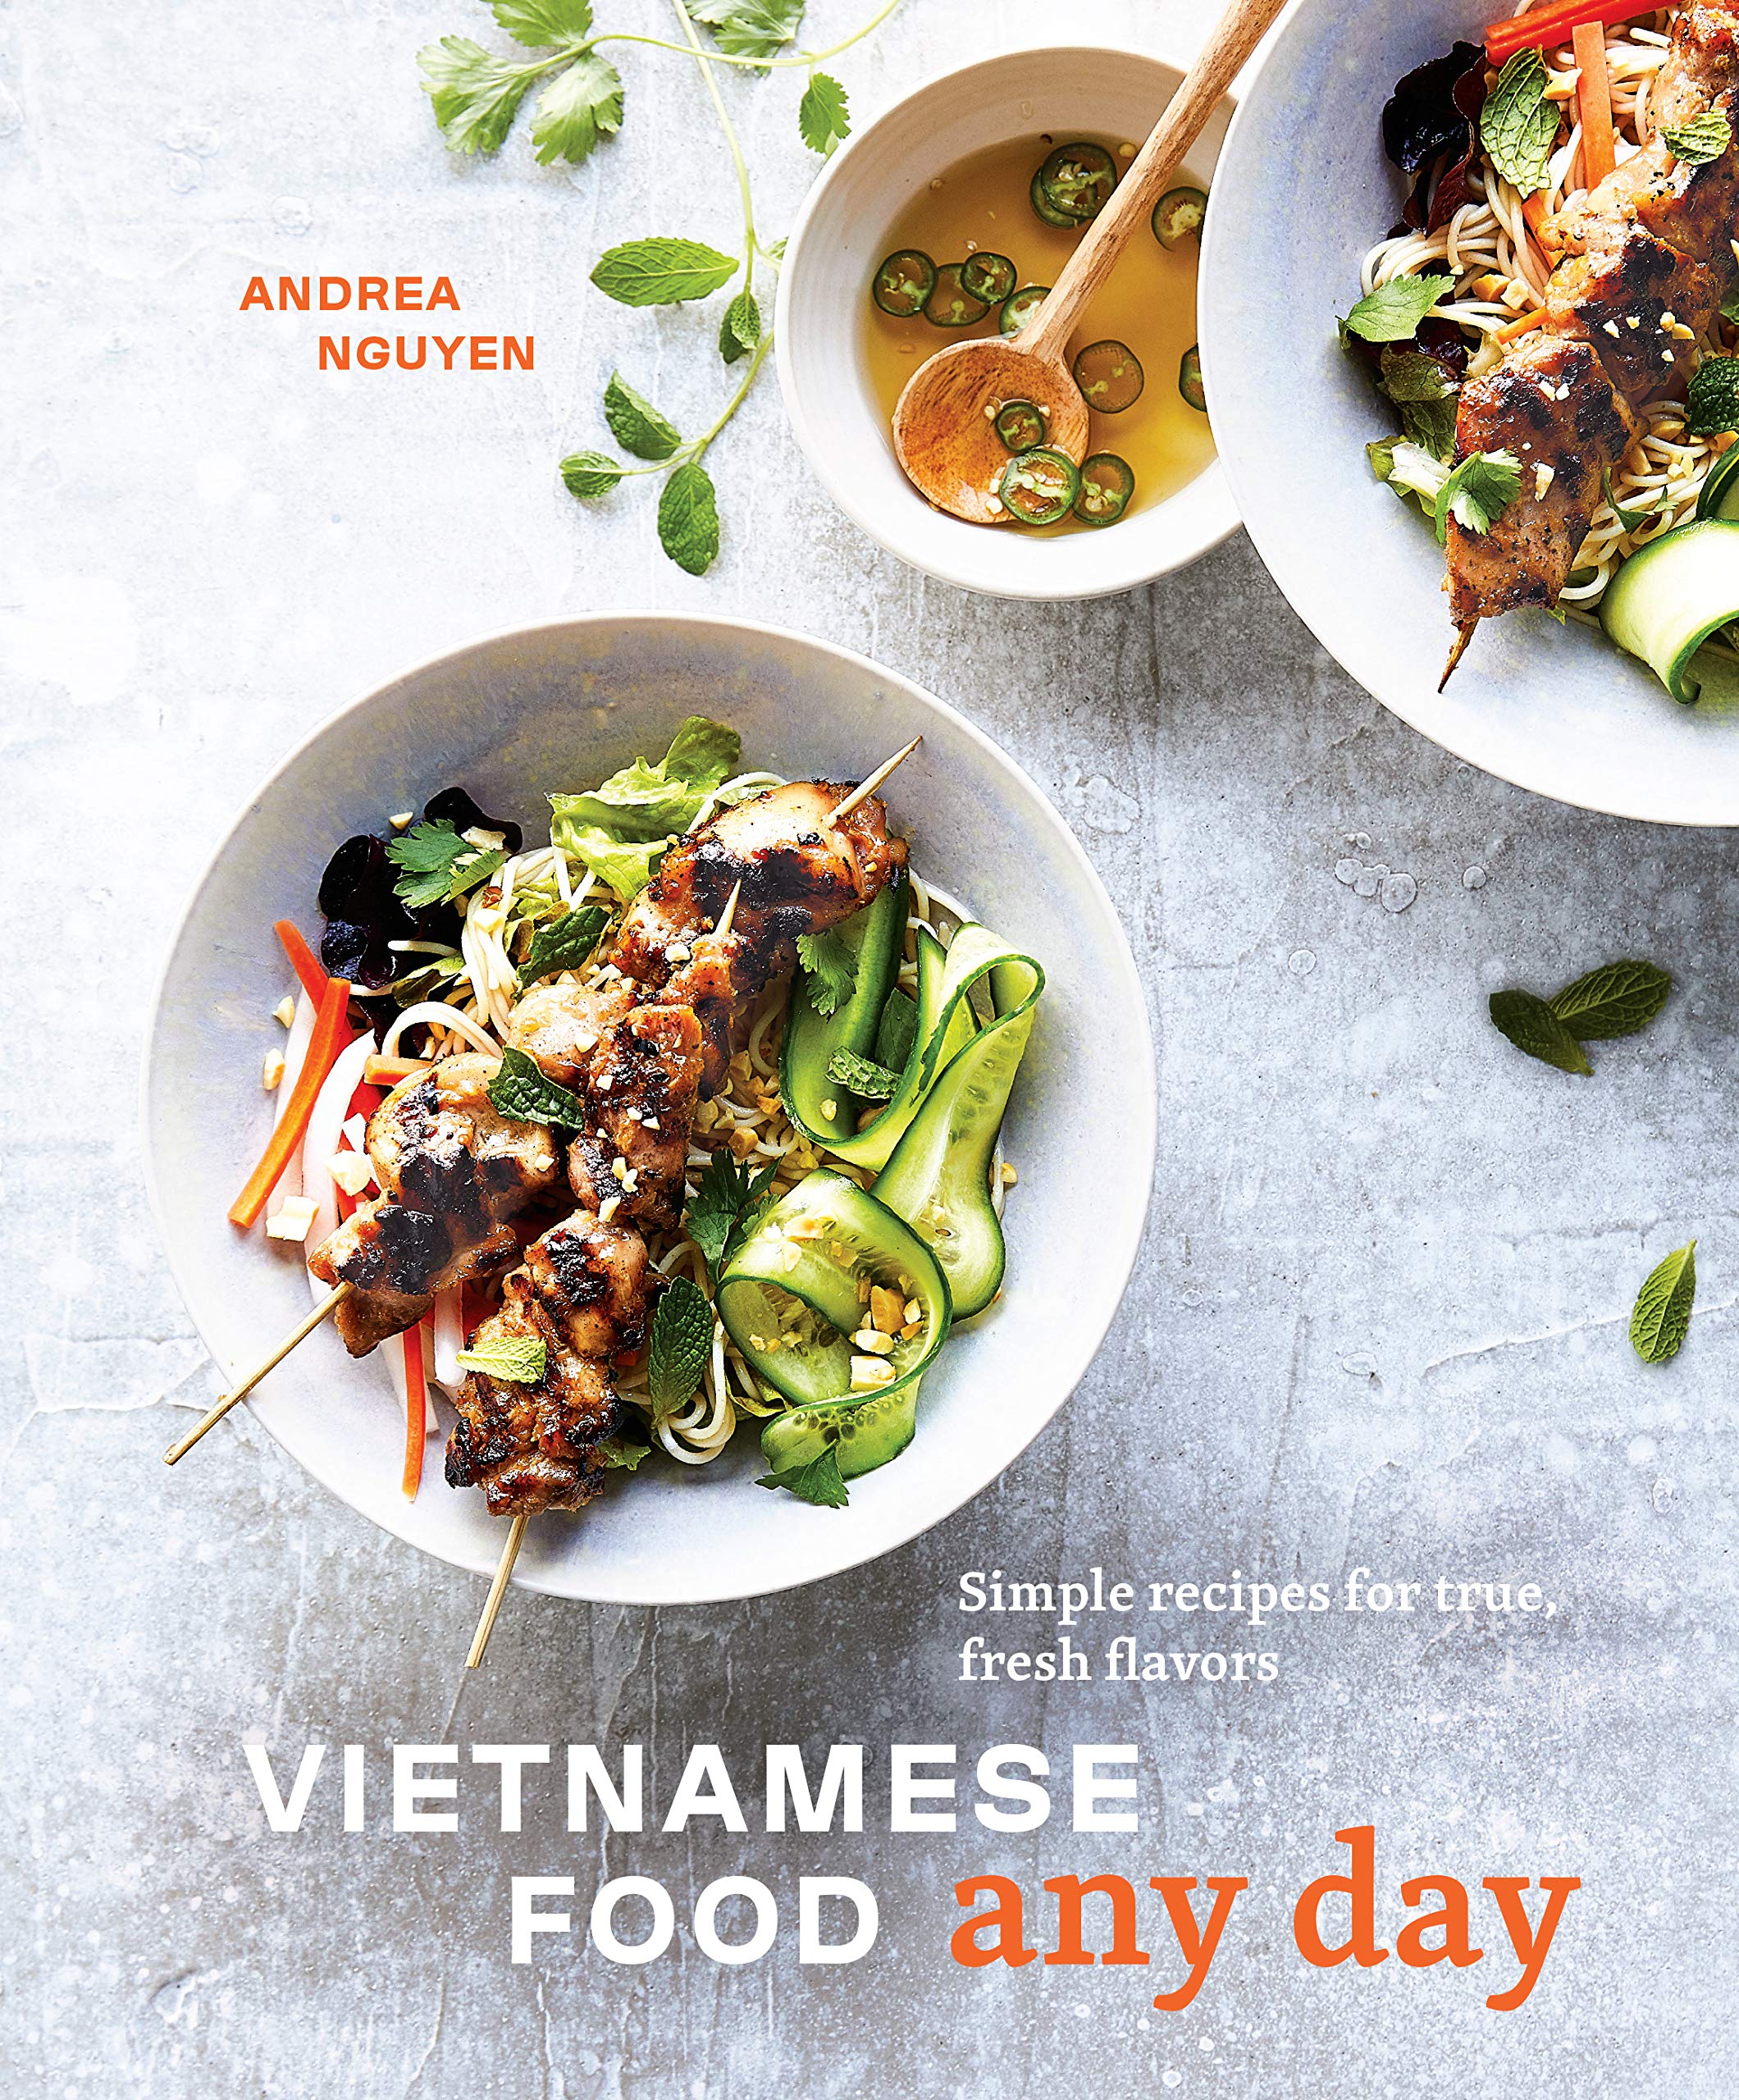 Vietnamese Food Any Day: Simple Recipes for True, Fresh Flavors *SIGNED!* (Andrea Nguyen)